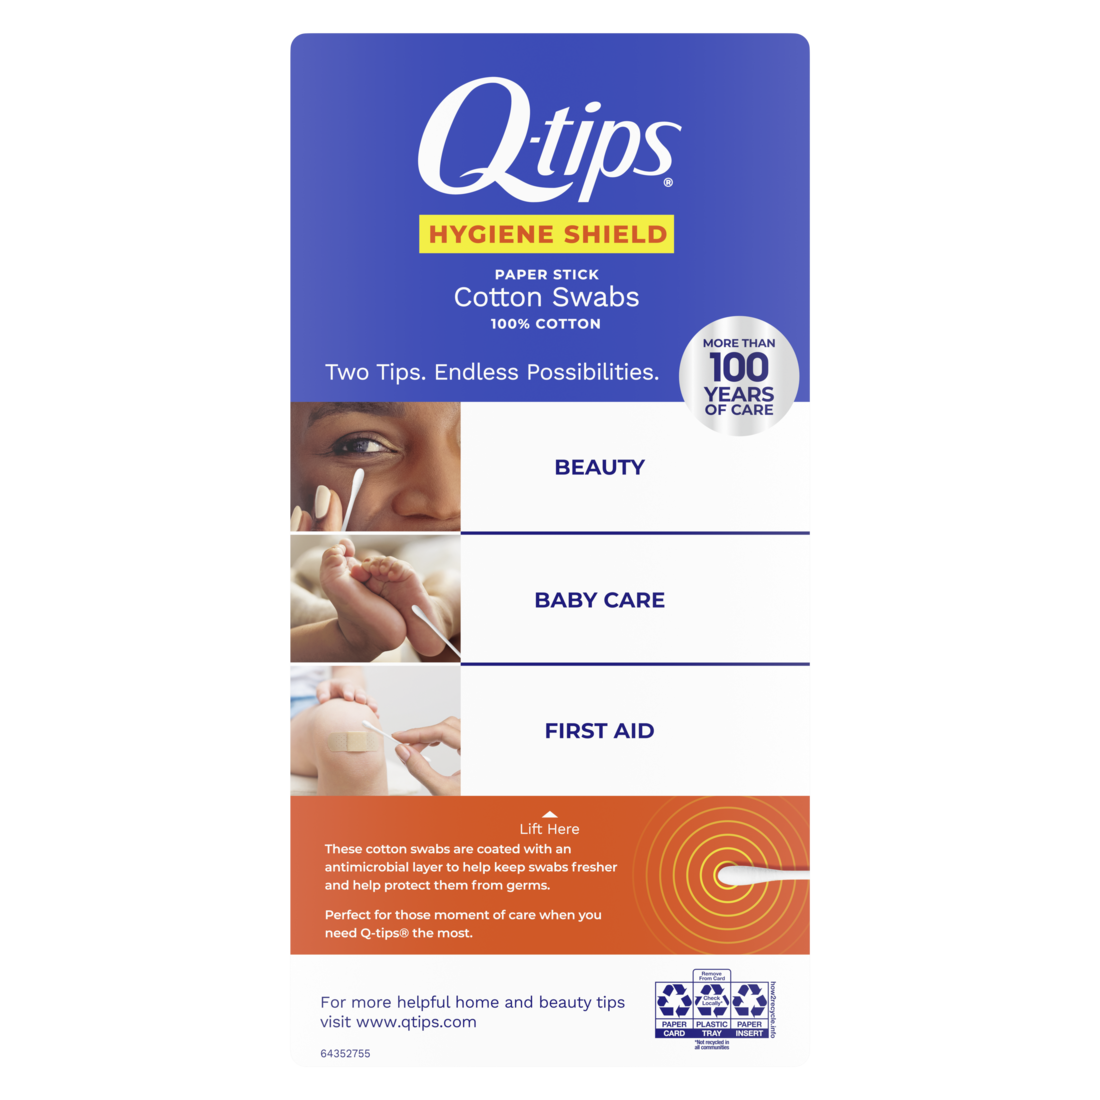 Q-tips Cotton Swabs, Hygiene Shield, 300 Count - image 3 of 7